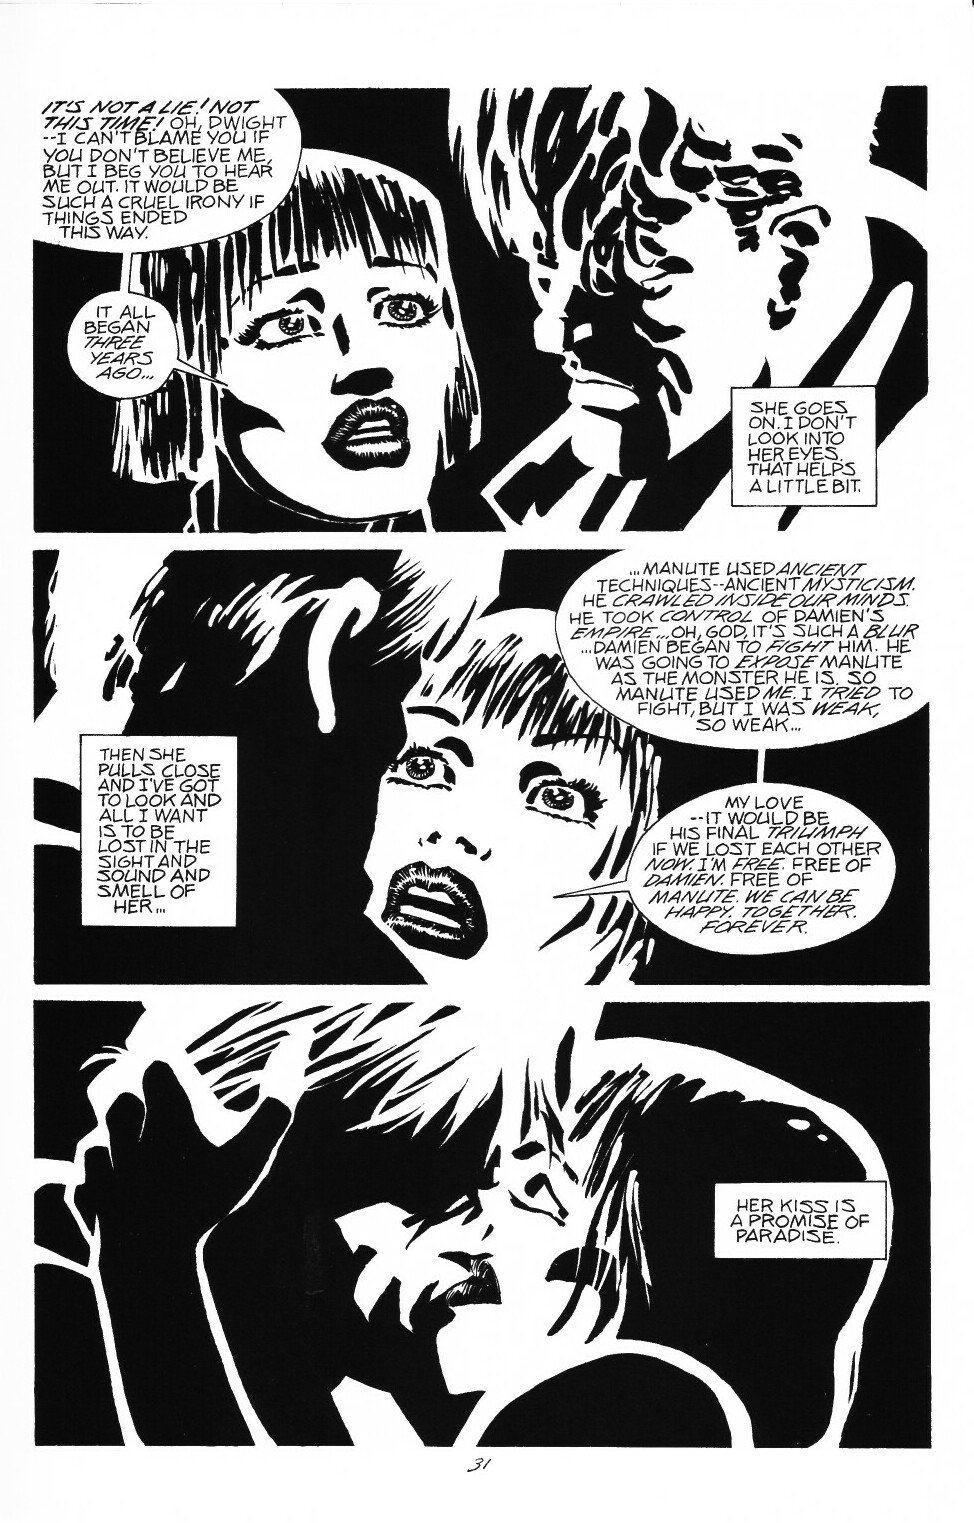 Sin City: A Dame To Kill For Episode 6-B